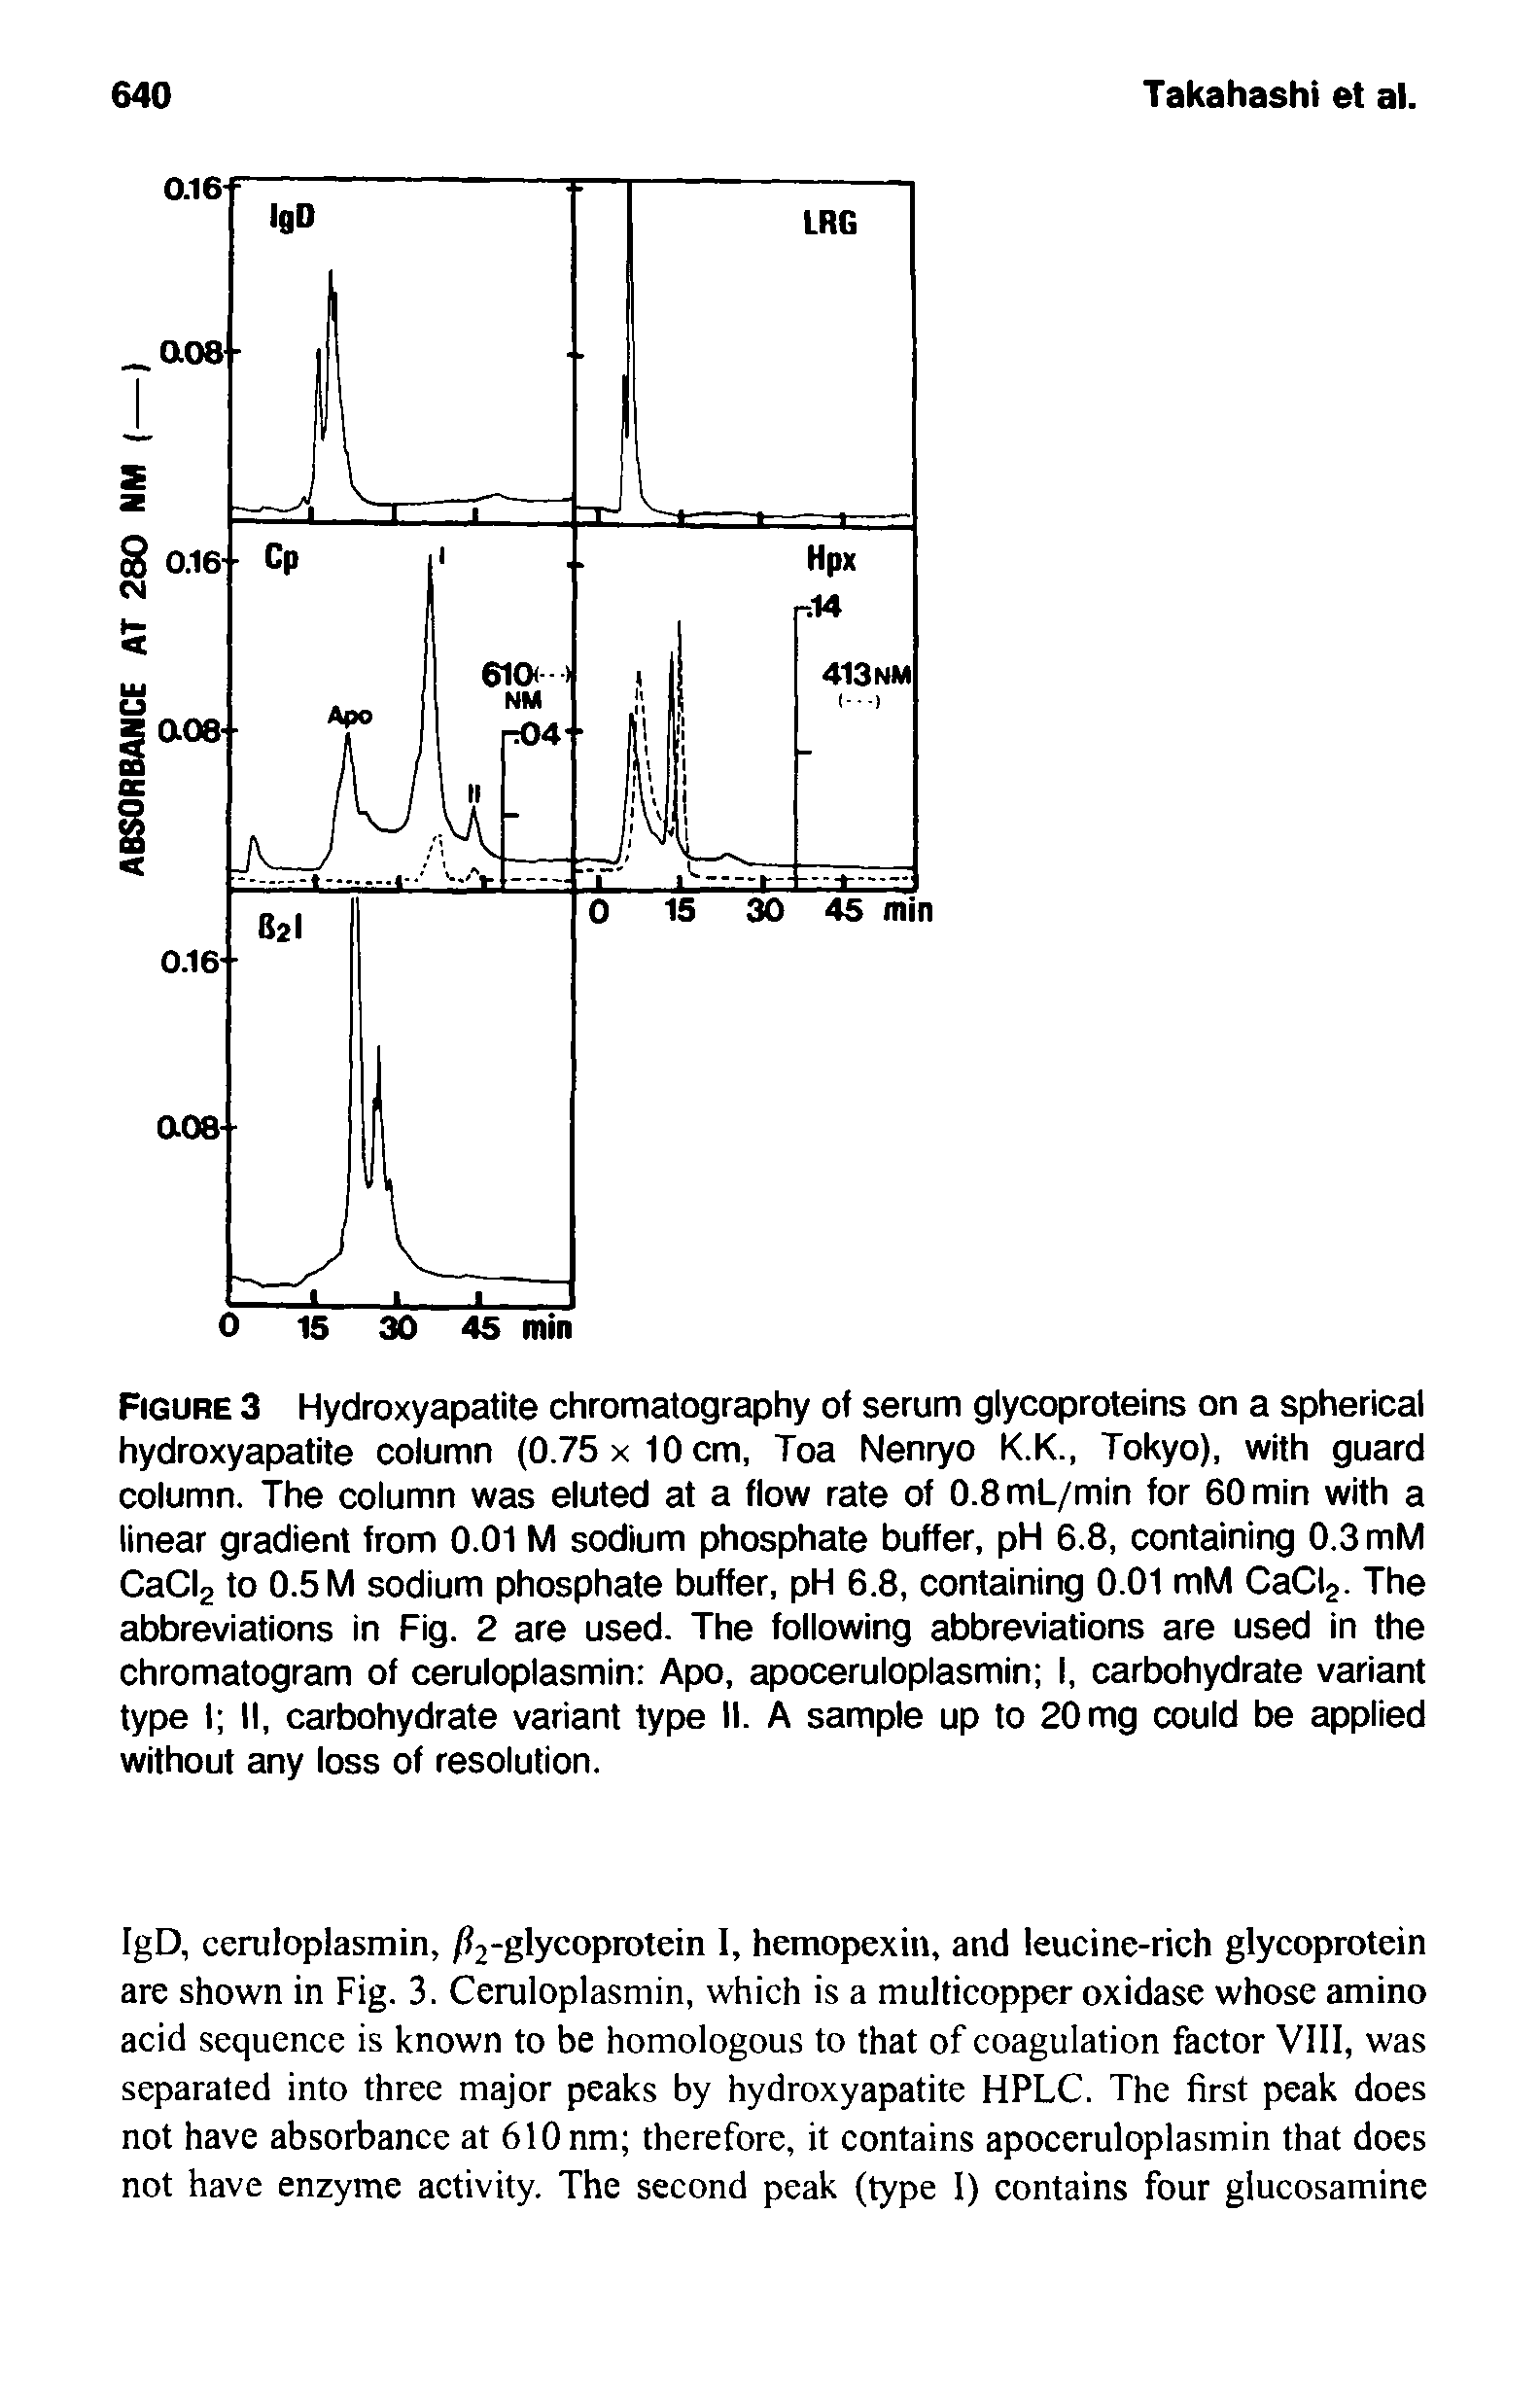 Figure 3 Hydroxyapatite chromatography of serum glycoproteins on a spherical hydroxyapatite column (0.75 x 10 cm, Toa Nenryo K.K., Tokyo), with guard column. The column was eluted at a flow rate of 0.8mL/min for 60 min with a linear gradient from 0.01 M sodium phosphate buffer, pH 6.8, containing 0.3 mM CaClg to 0.5 M sodium phosphate buffer, pH 6.8, containing 0.01 mM CaCl2. The abbreviations in Fig. 2 are used. The following abbreviations are used in the chromatogram of ceruloplasmin Apo, apoceruloplasmin I, carbohydrate variant type I II, carbohydrate variant type II. A sample up to 20 mg could be applied without any loss of resolution.